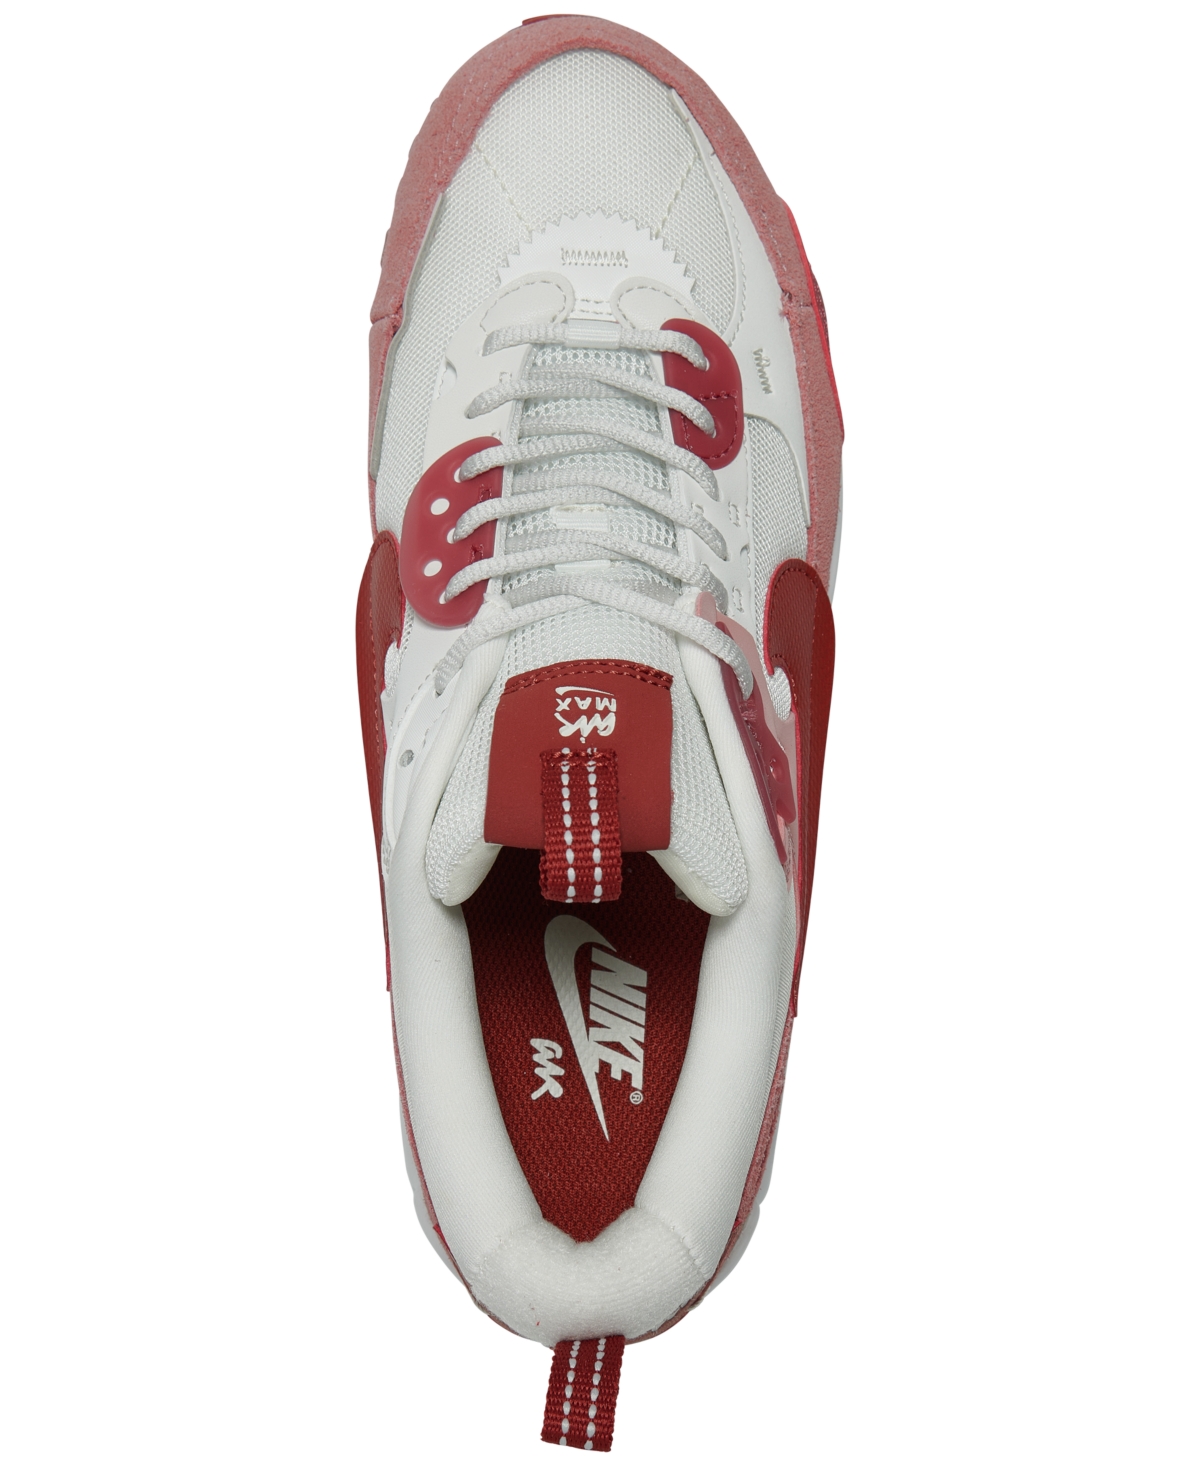 Shop Nike Women's Air Max 90 Futura Casual Sneakers From Finish Line In Red Stardust,summit White